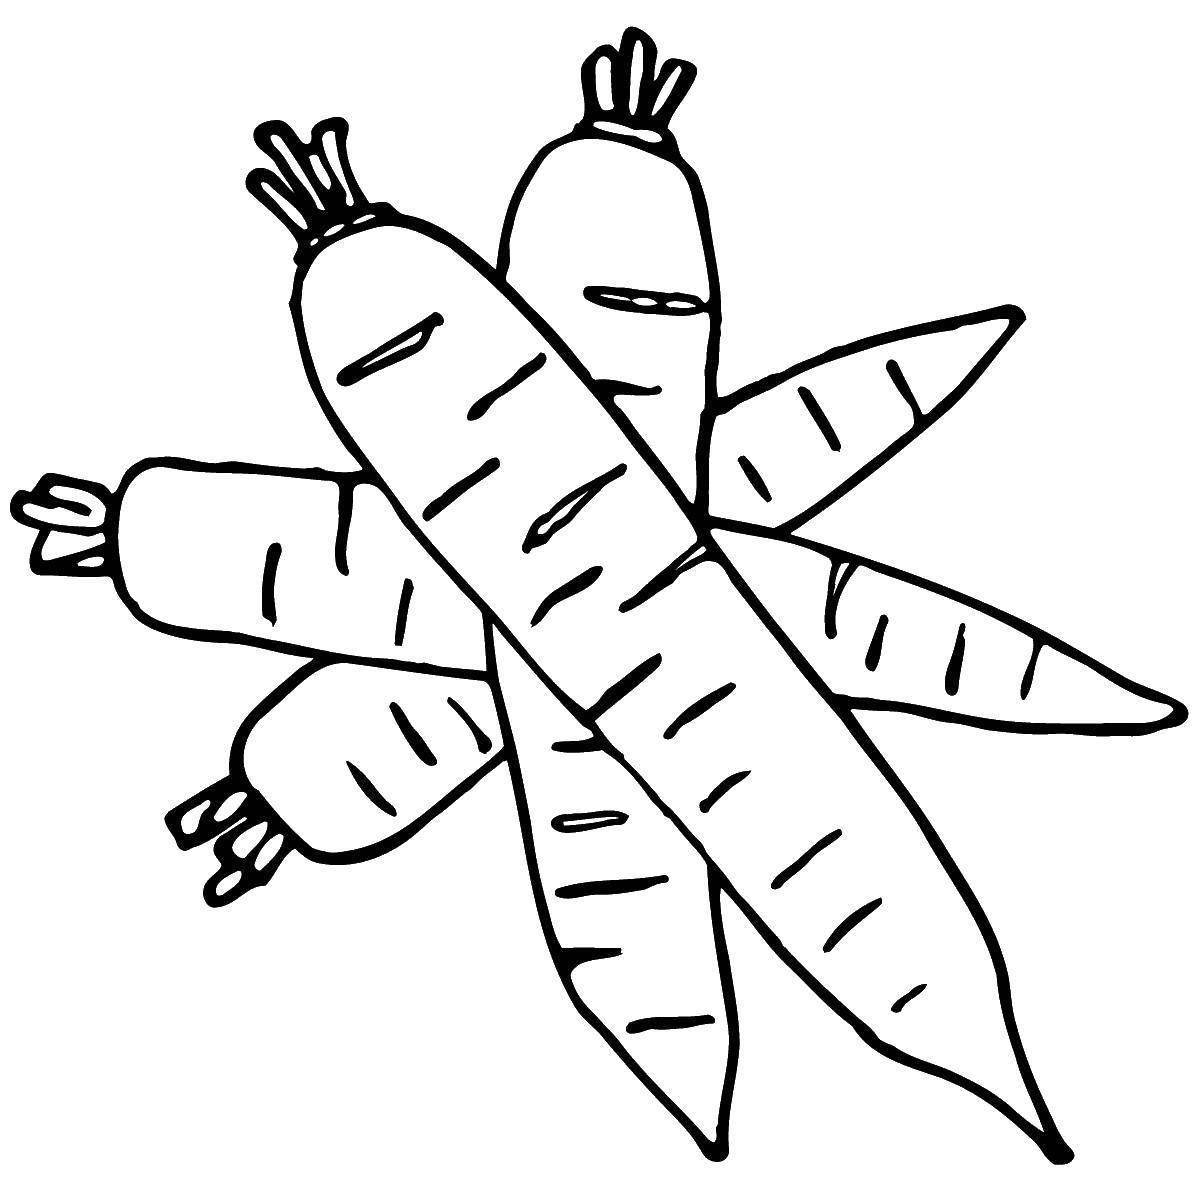 Adorable Carrot Coloring Page for Preschoolers 2-3